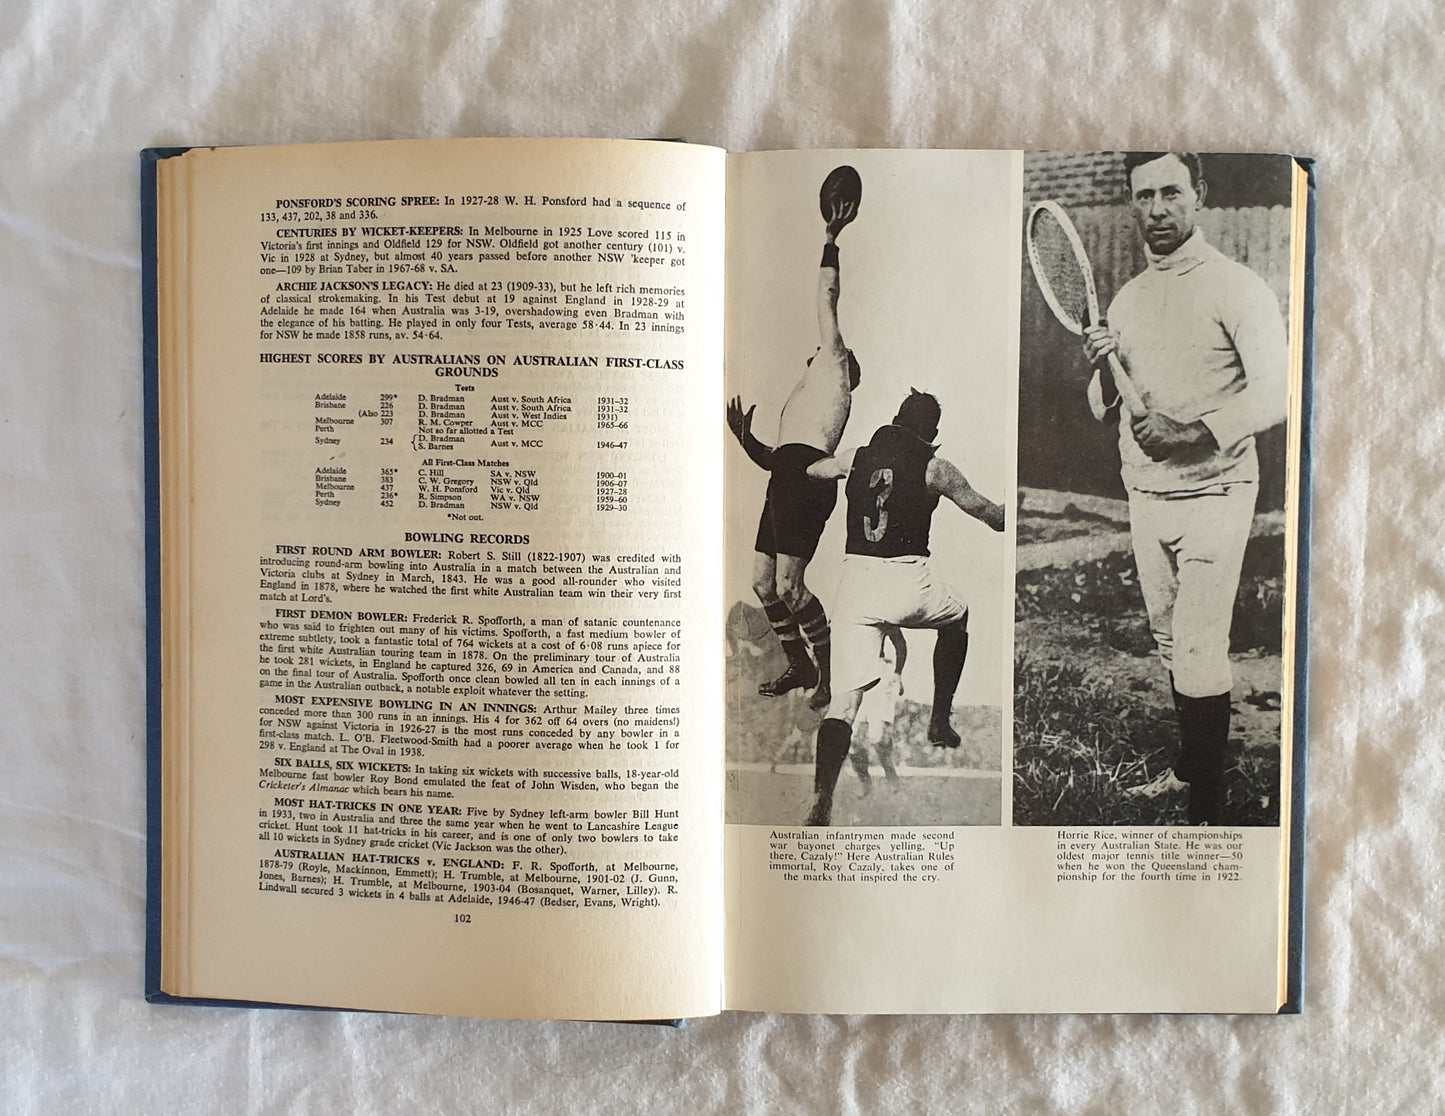 The Ampol Book of Australian Sporting Records by Jack Pollard